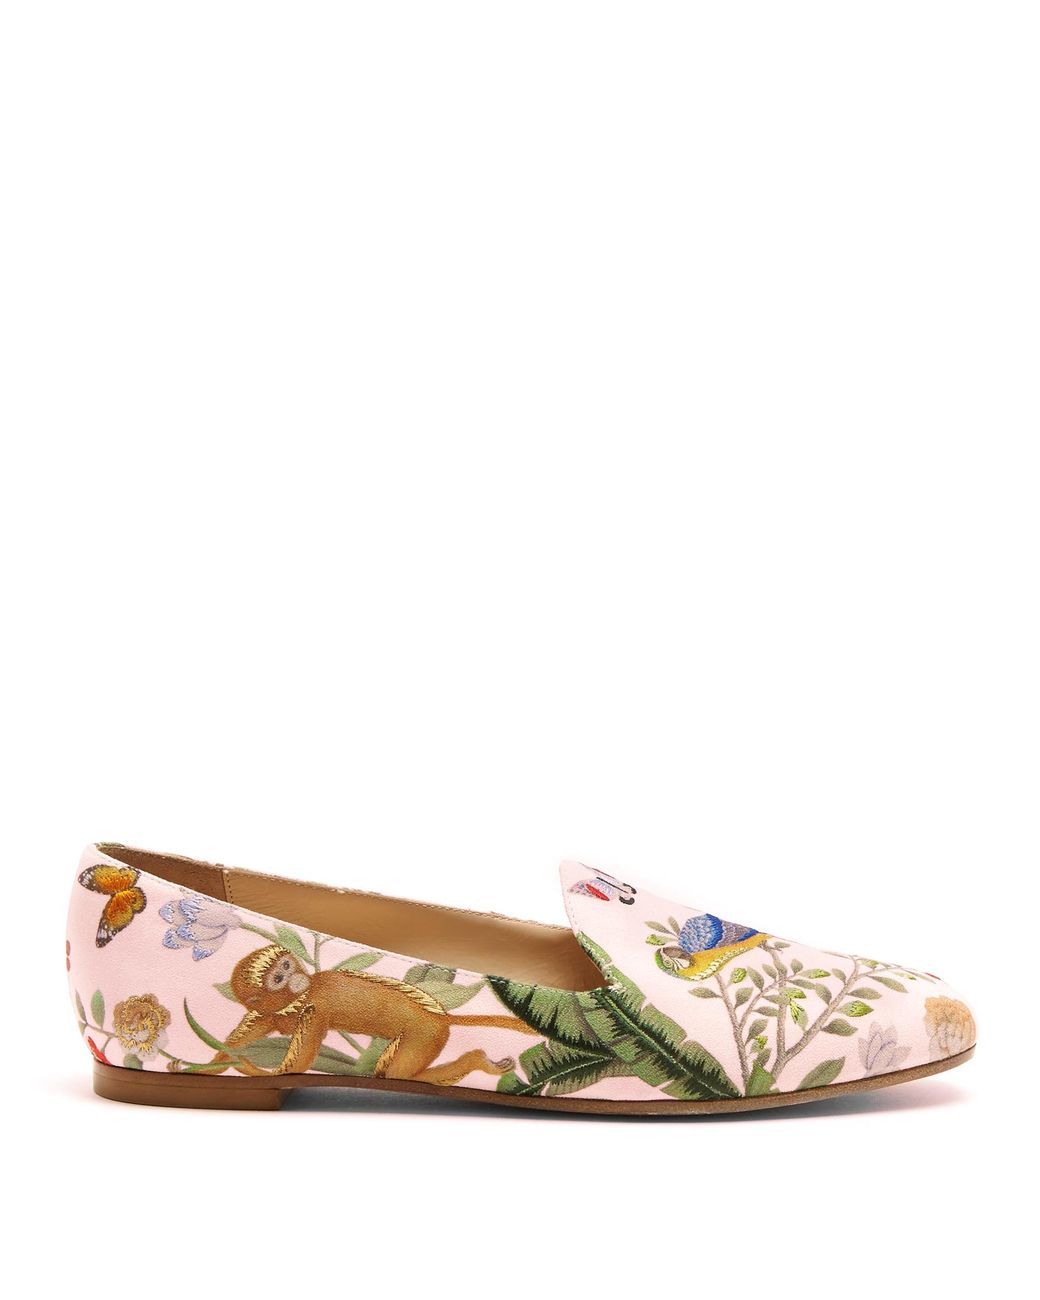 Aquazzura For De Gournay Embroidered Loafer | Lyst